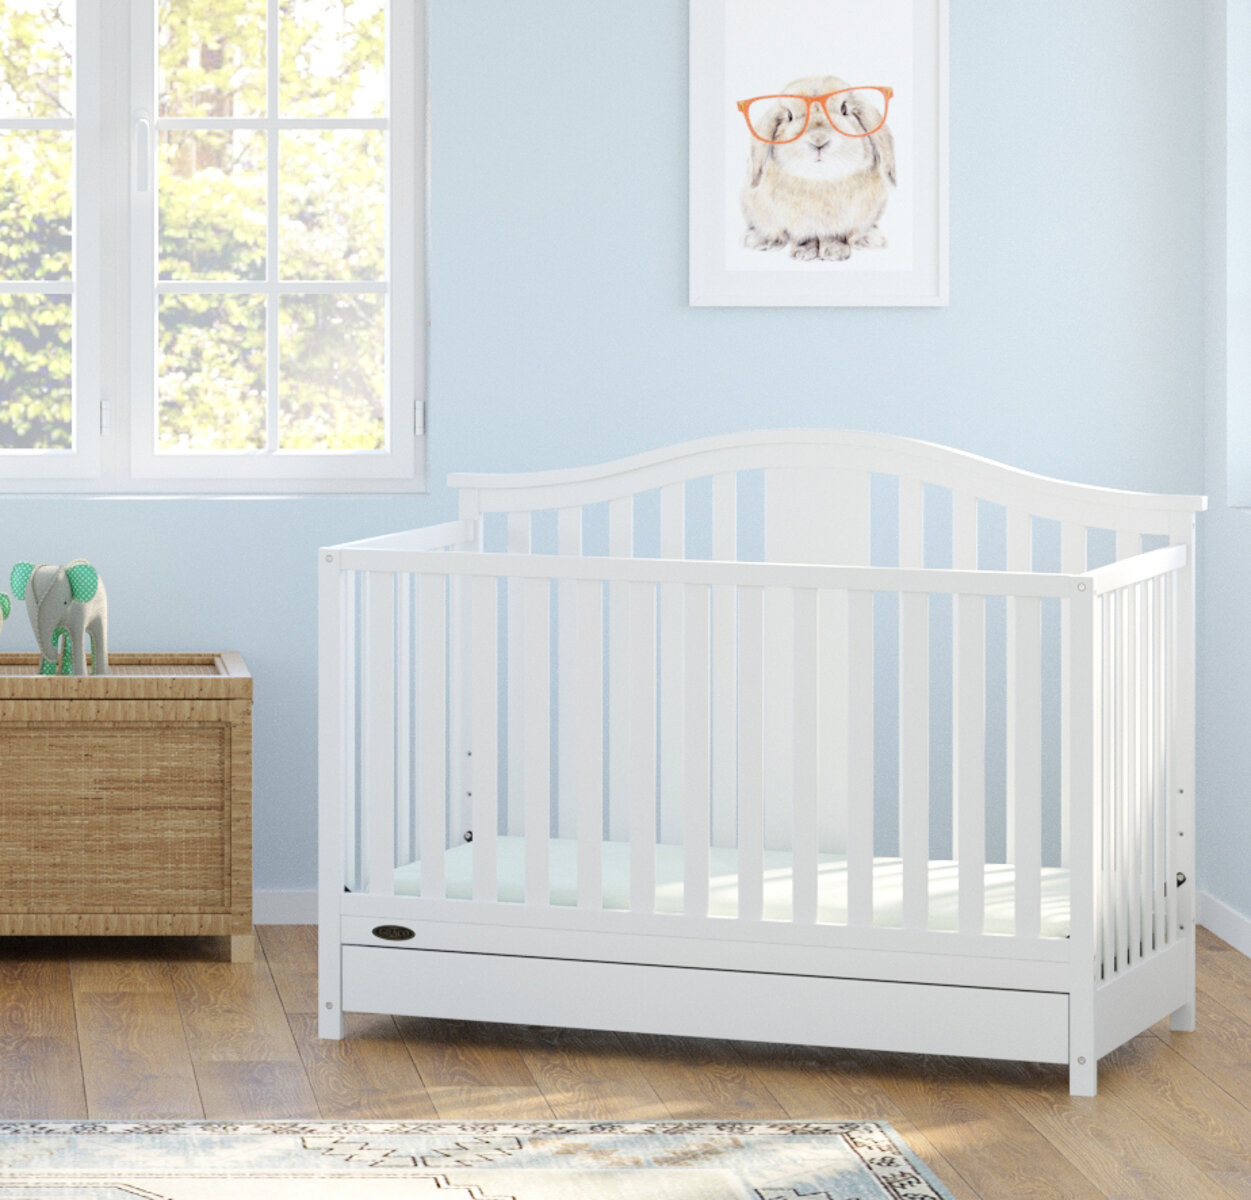 graco four in one crib